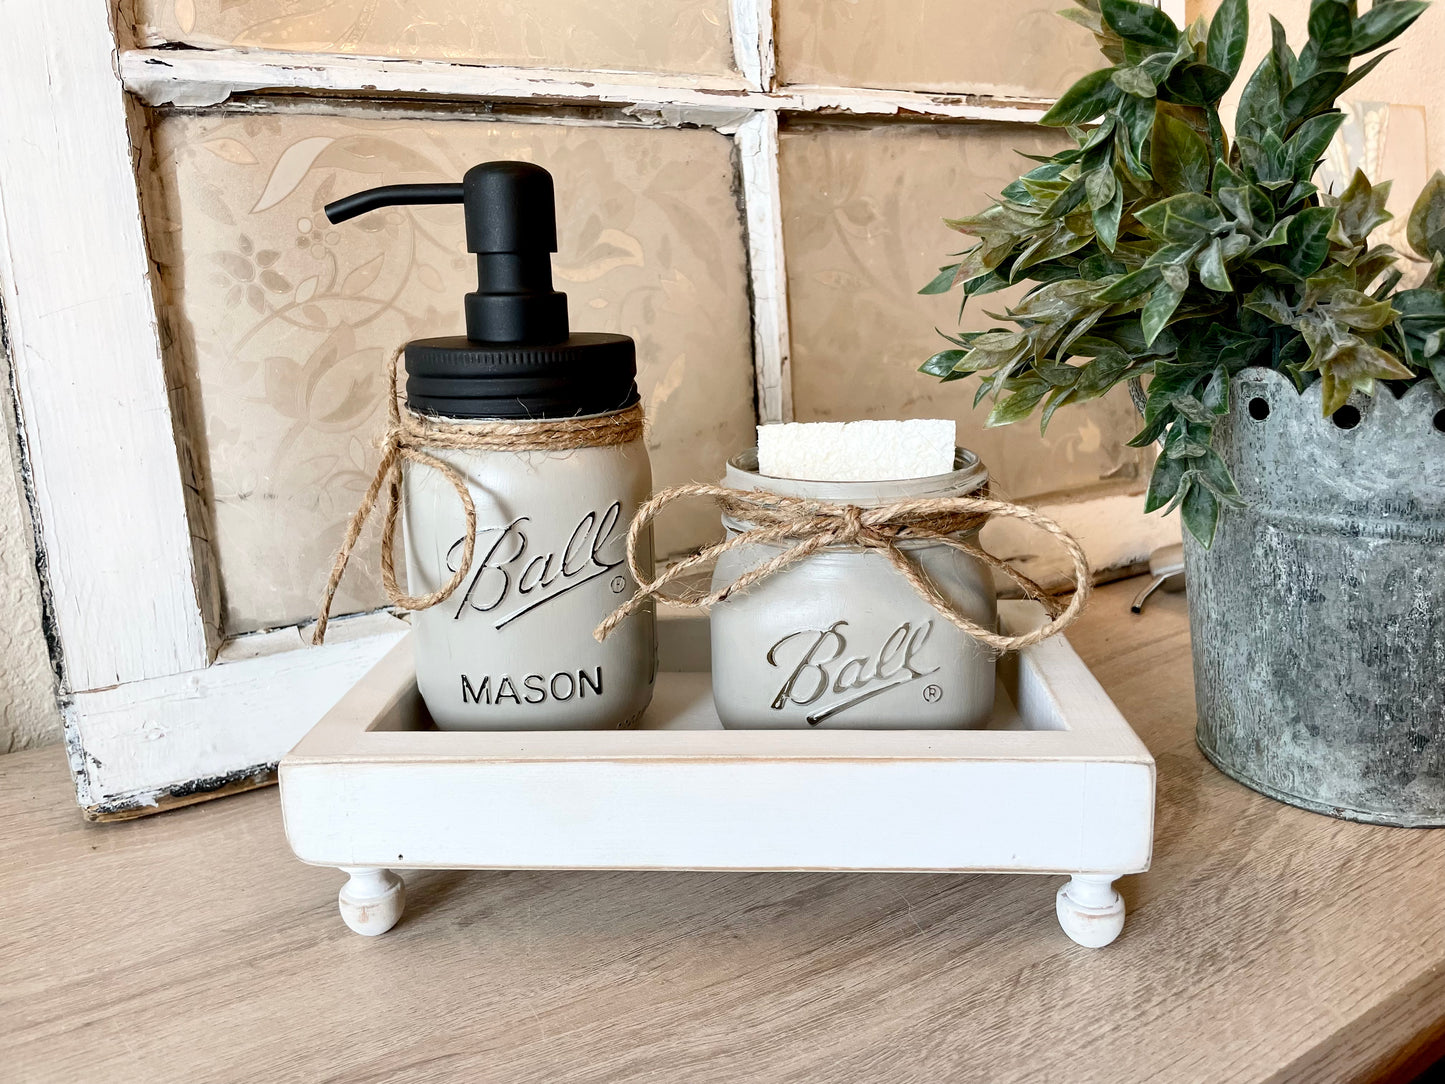 Farmhouse Wood Riser Tray for Sink in Kitchen or Bath with Mason Jars Good for Soap Dispenser and Sponge Holder or Make up Brushes